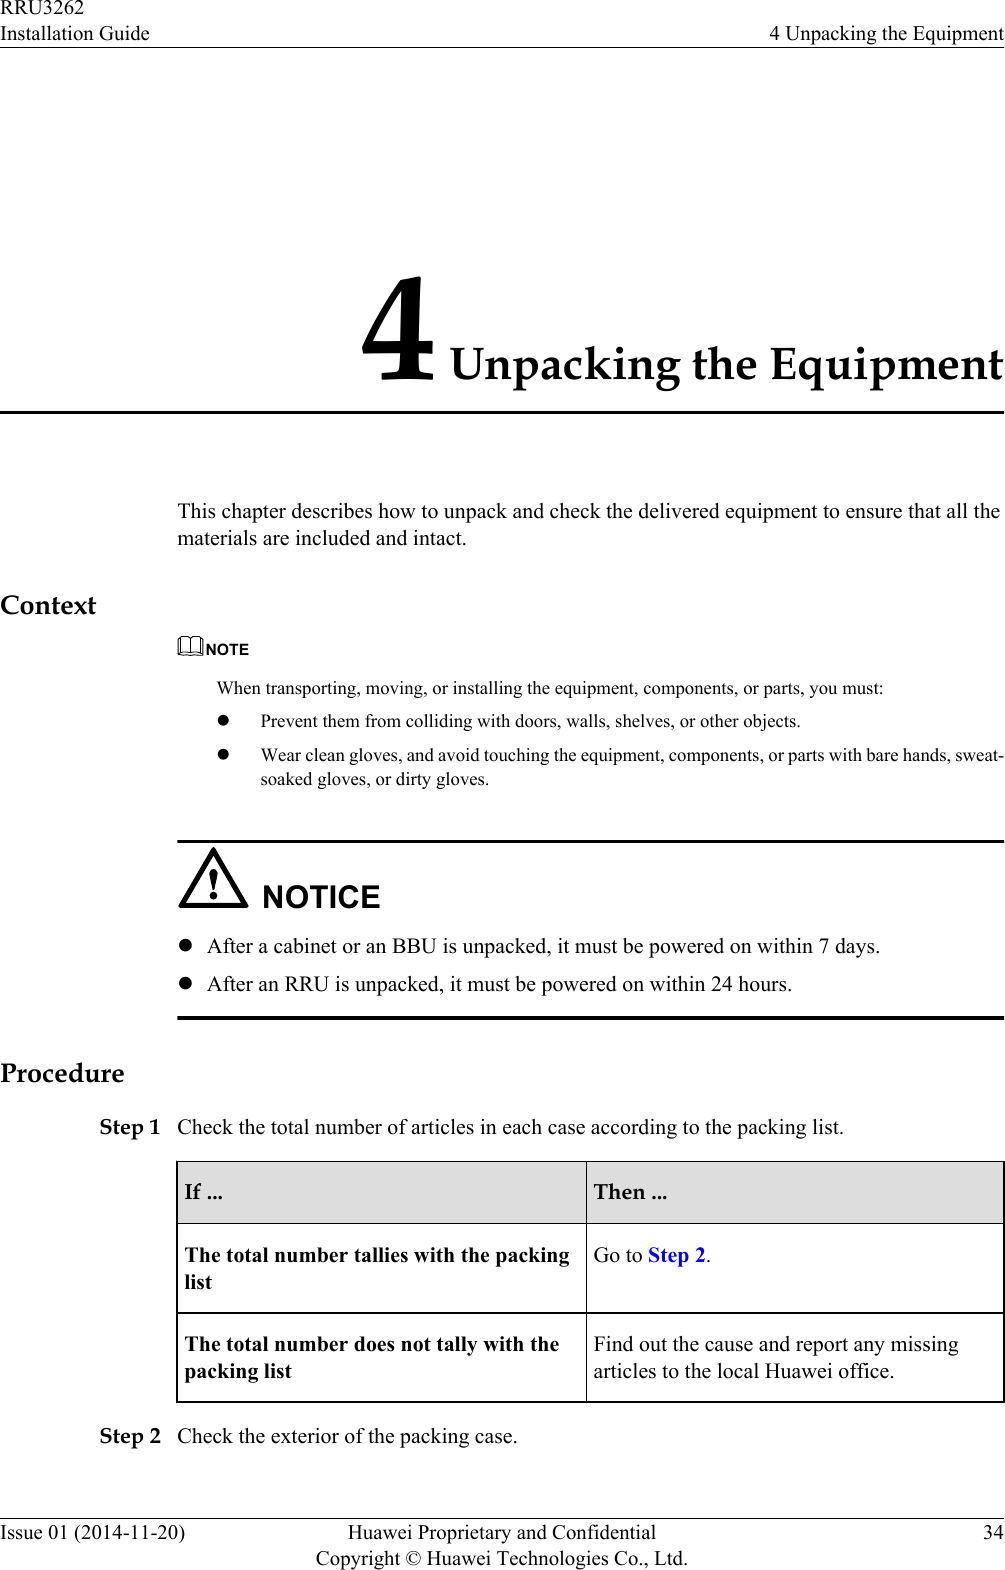 4 Unpacking the EquipmentThis chapter describes how to unpack and check the delivered equipment to ensure that all thematerials are included and intact.ContextNOTEWhen transporting, moving, or installing the equipment, components, or parts, you must:lPrevent them from colliding with doors, walls, shelves, or other objects.lWear clean gloves, and avoid touching the equipment, components, or parts with bare hands, sweat-soaked gloves, or dirty gloves.NOTICElAfter a cabinet or an BBU is unpacked, it must be powered on within 7 days.lAfter an RRU is unpacked, it must be powered on within 24 hours.ProcedureStep 1 Check the total number of articles in each case according to the packing list.If ... Then ...The total number tallies with the packinglistGo to Step 2.The total number does not tally with thepacking listFind out the cause and report any missingarticles to the local Huawei office.Step 2 Check the exterior of the packing case.RRU3262Installation Guide 4 Unpacking the EquipmentIssue 01 (2014-11-20) Huawei Proprietary and ConfidentialCopyright © Huawei Technologies Co., Ltd.34